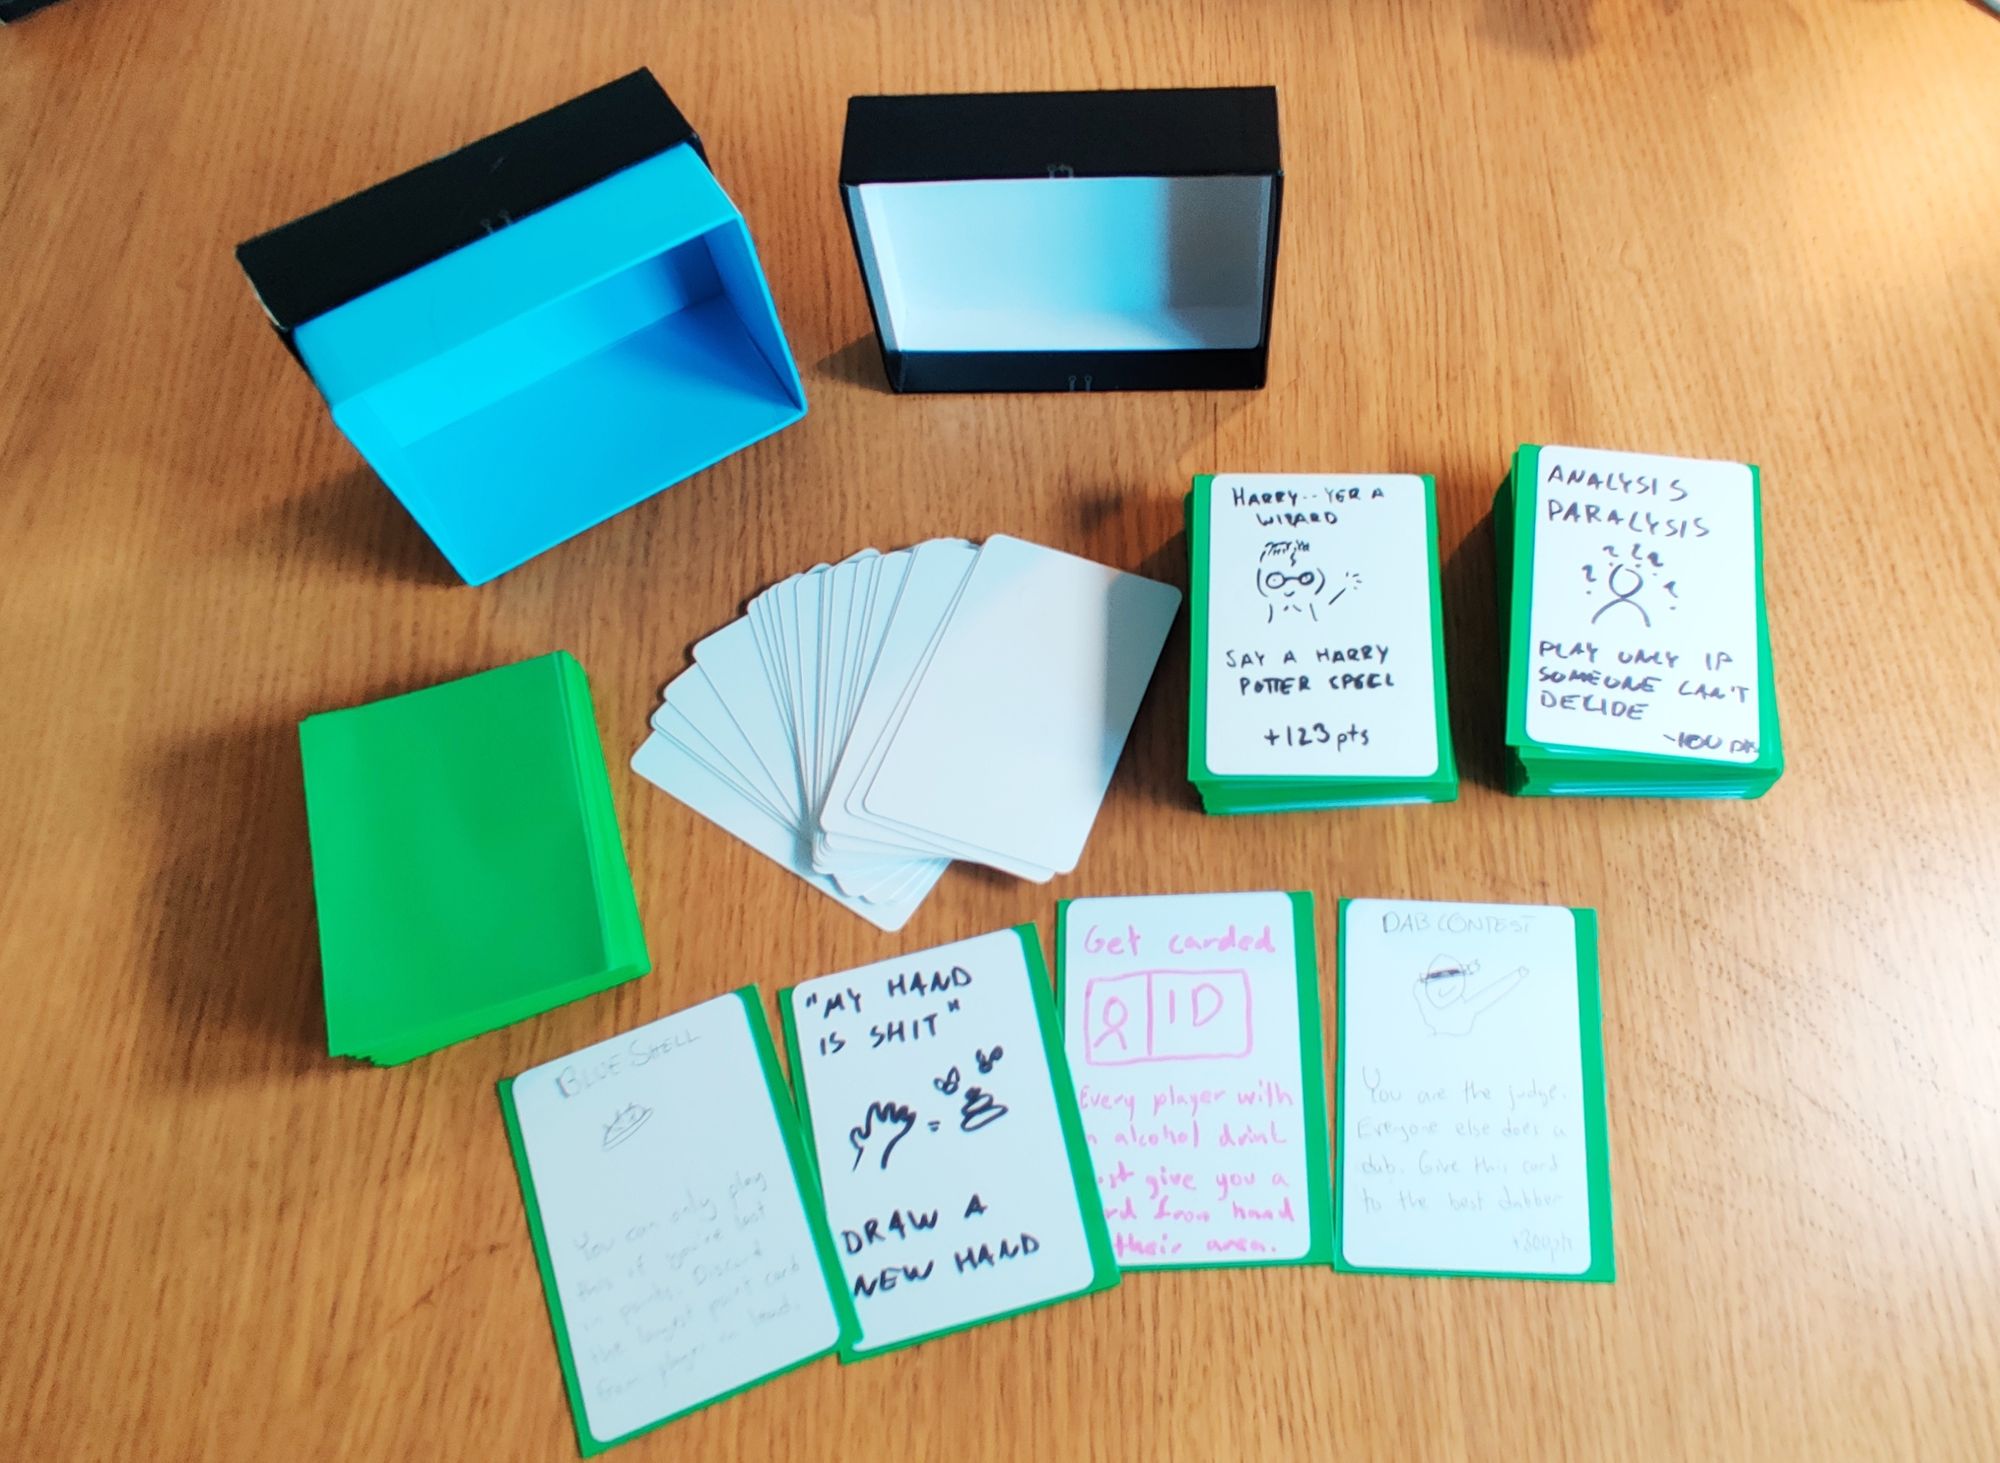 A collection of empty green sleeves, empty cards and two stacks of cards with handwritten text and pictures